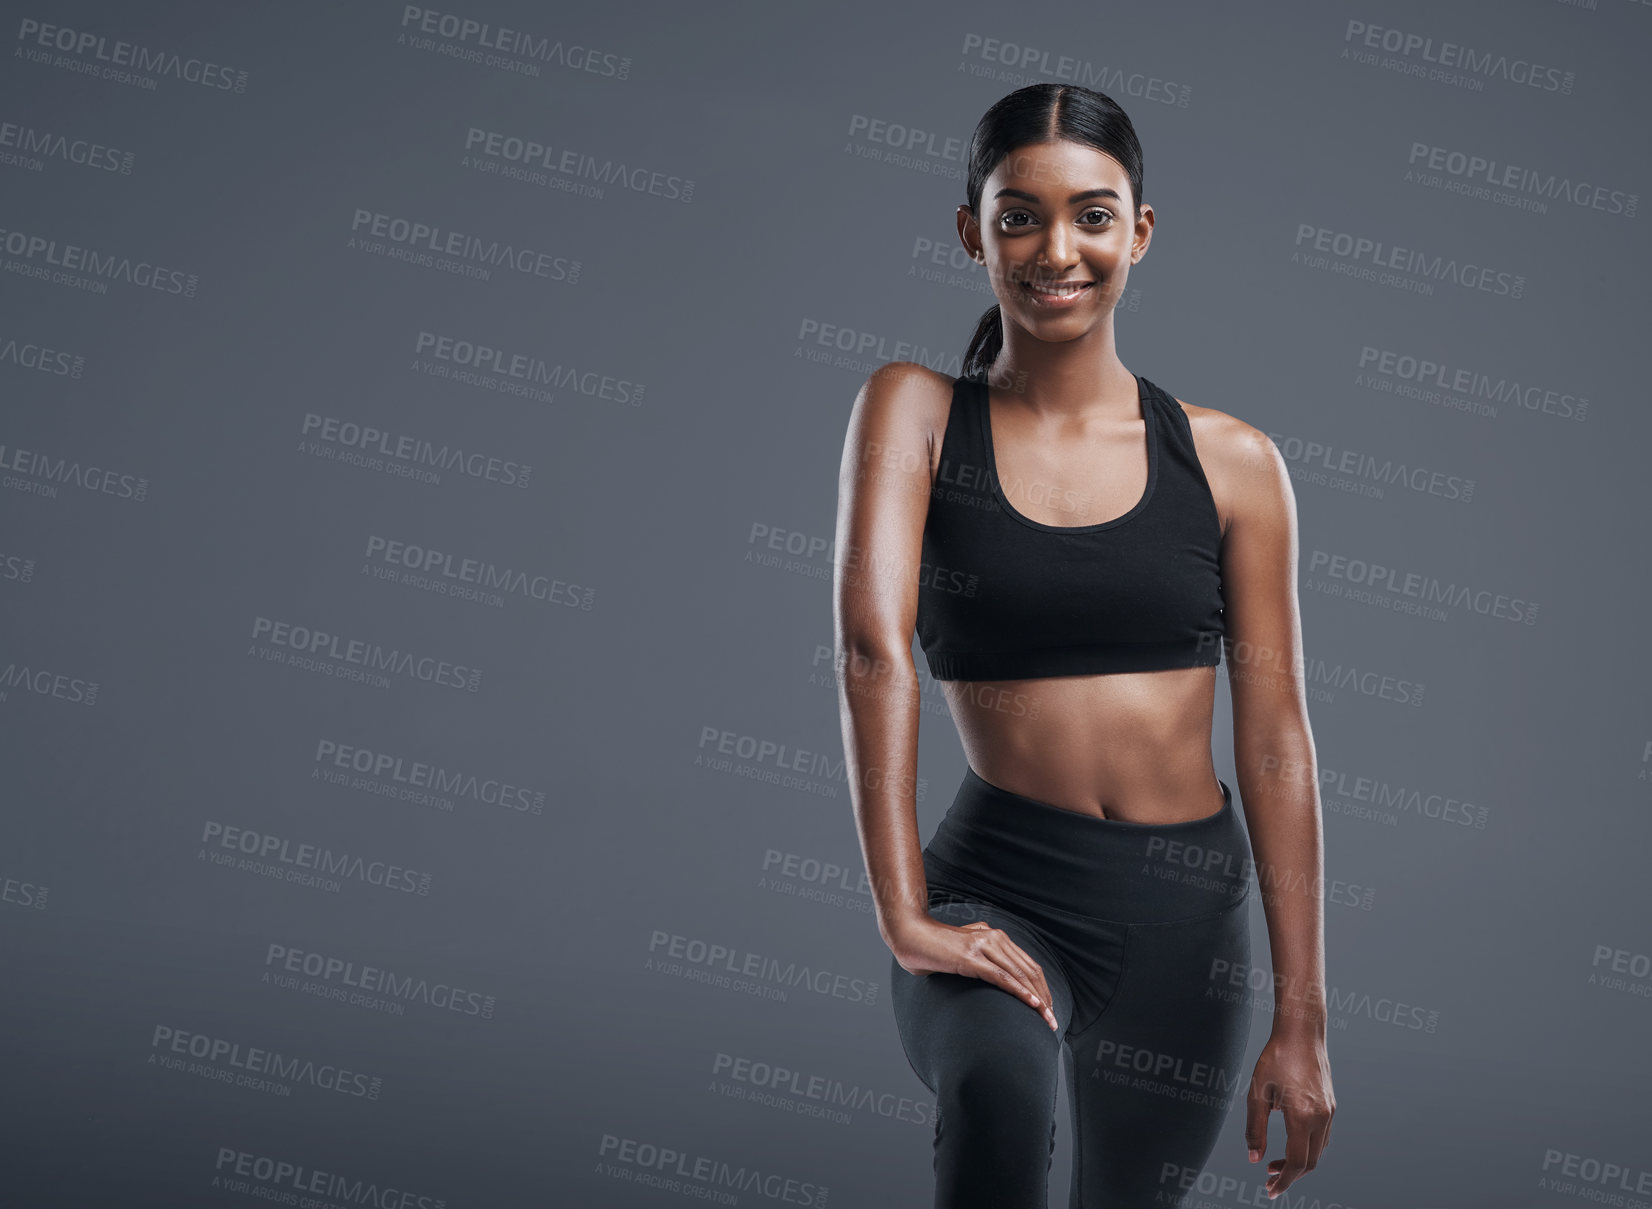 Buy stock photo Studio portrait of a sporty young woman posing against a gray background